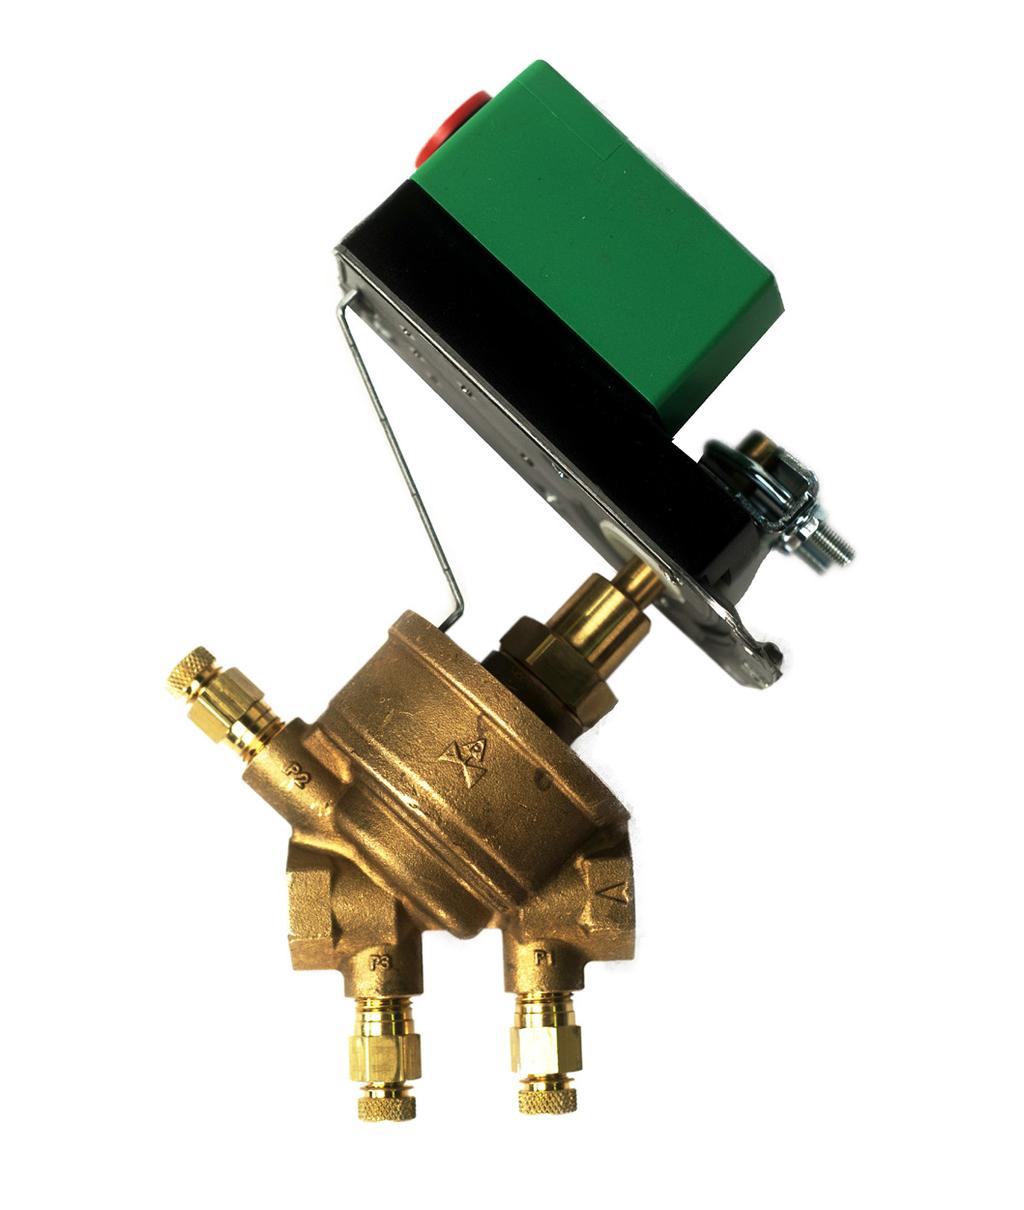 ½ LDP DeltaPValve Guaranteed ΔT DeltaPValve Series Valve Specifications Characteristics Pressure Independent Service Heating Water or Chilled Water, Glycol Maximum Design Flow at 5 PSID [0.